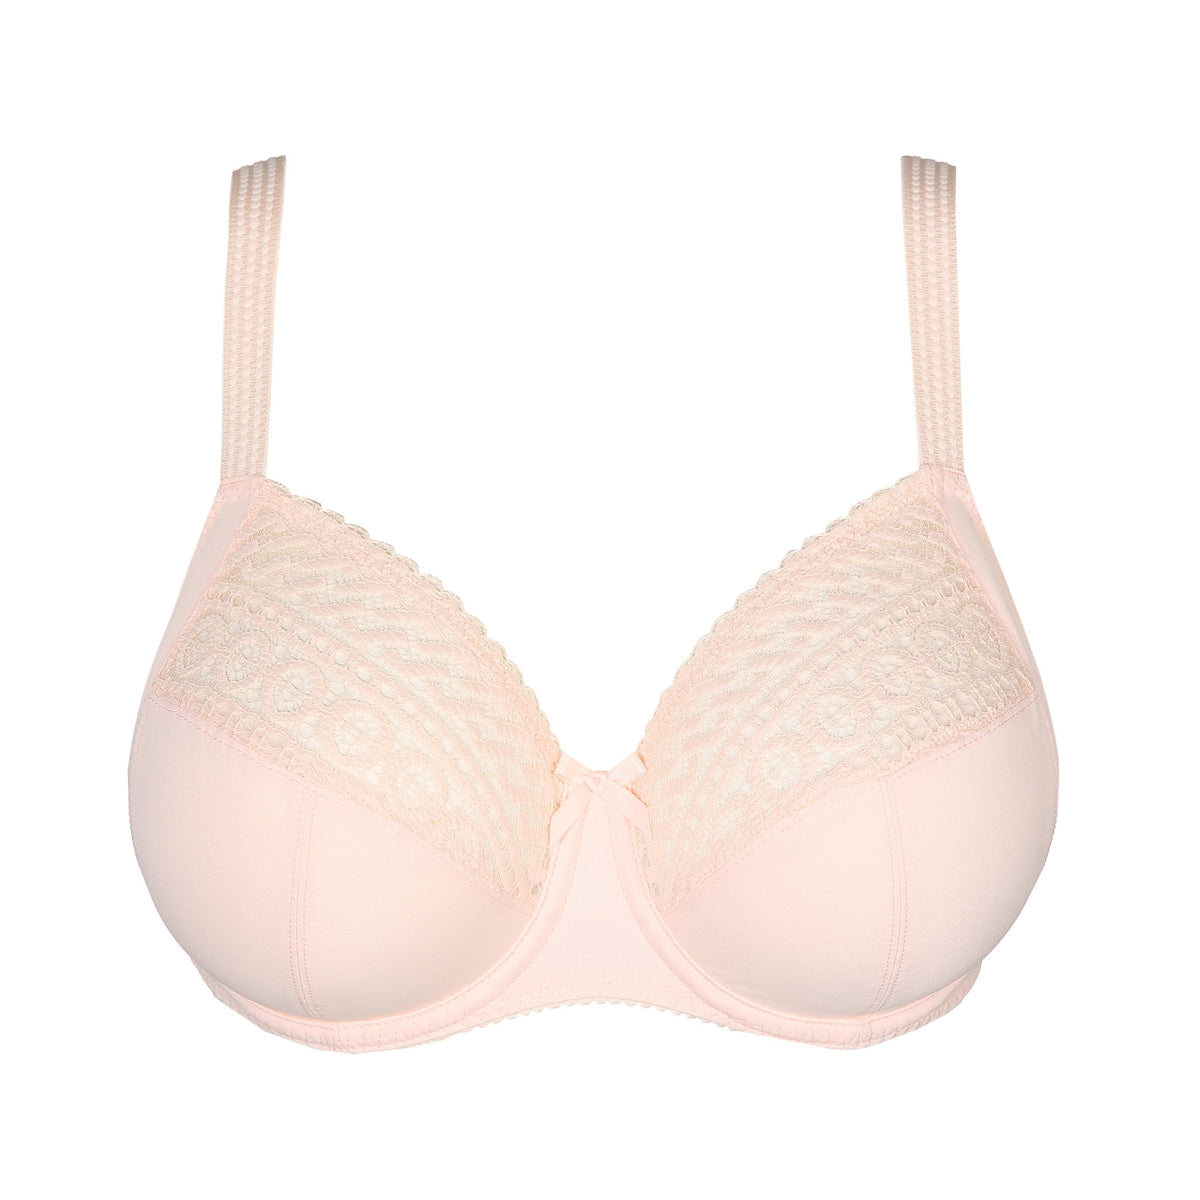 Prima Donna Every Woman - Spacer in Pink Blush – Lily Pad Lingerie